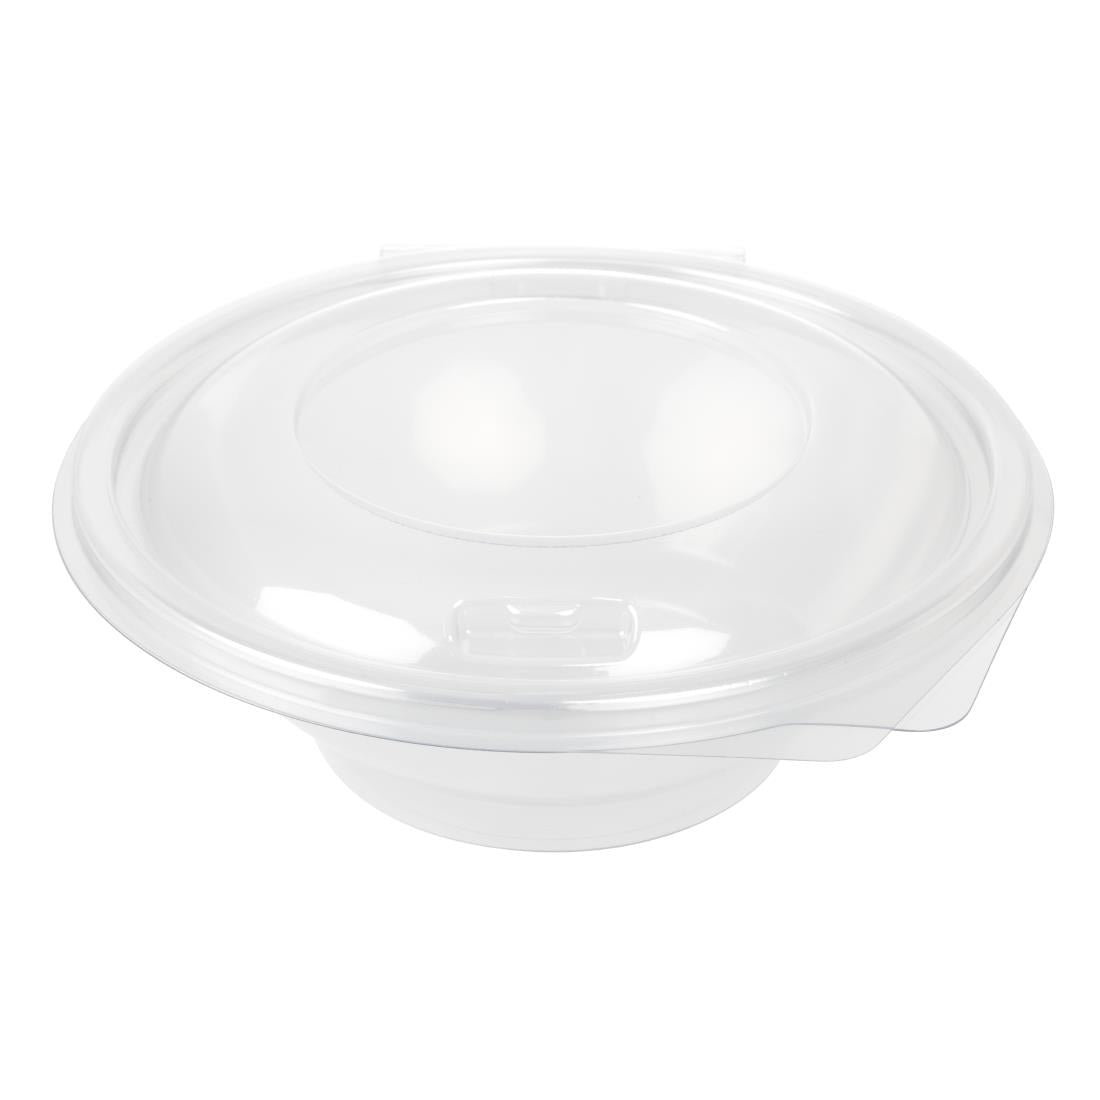 FB368 Faerch Contour Recyclable Deli Bowls With Lid 500ml / 17oz (Pack of 200) JD Catering Equipment Solutions Ltd